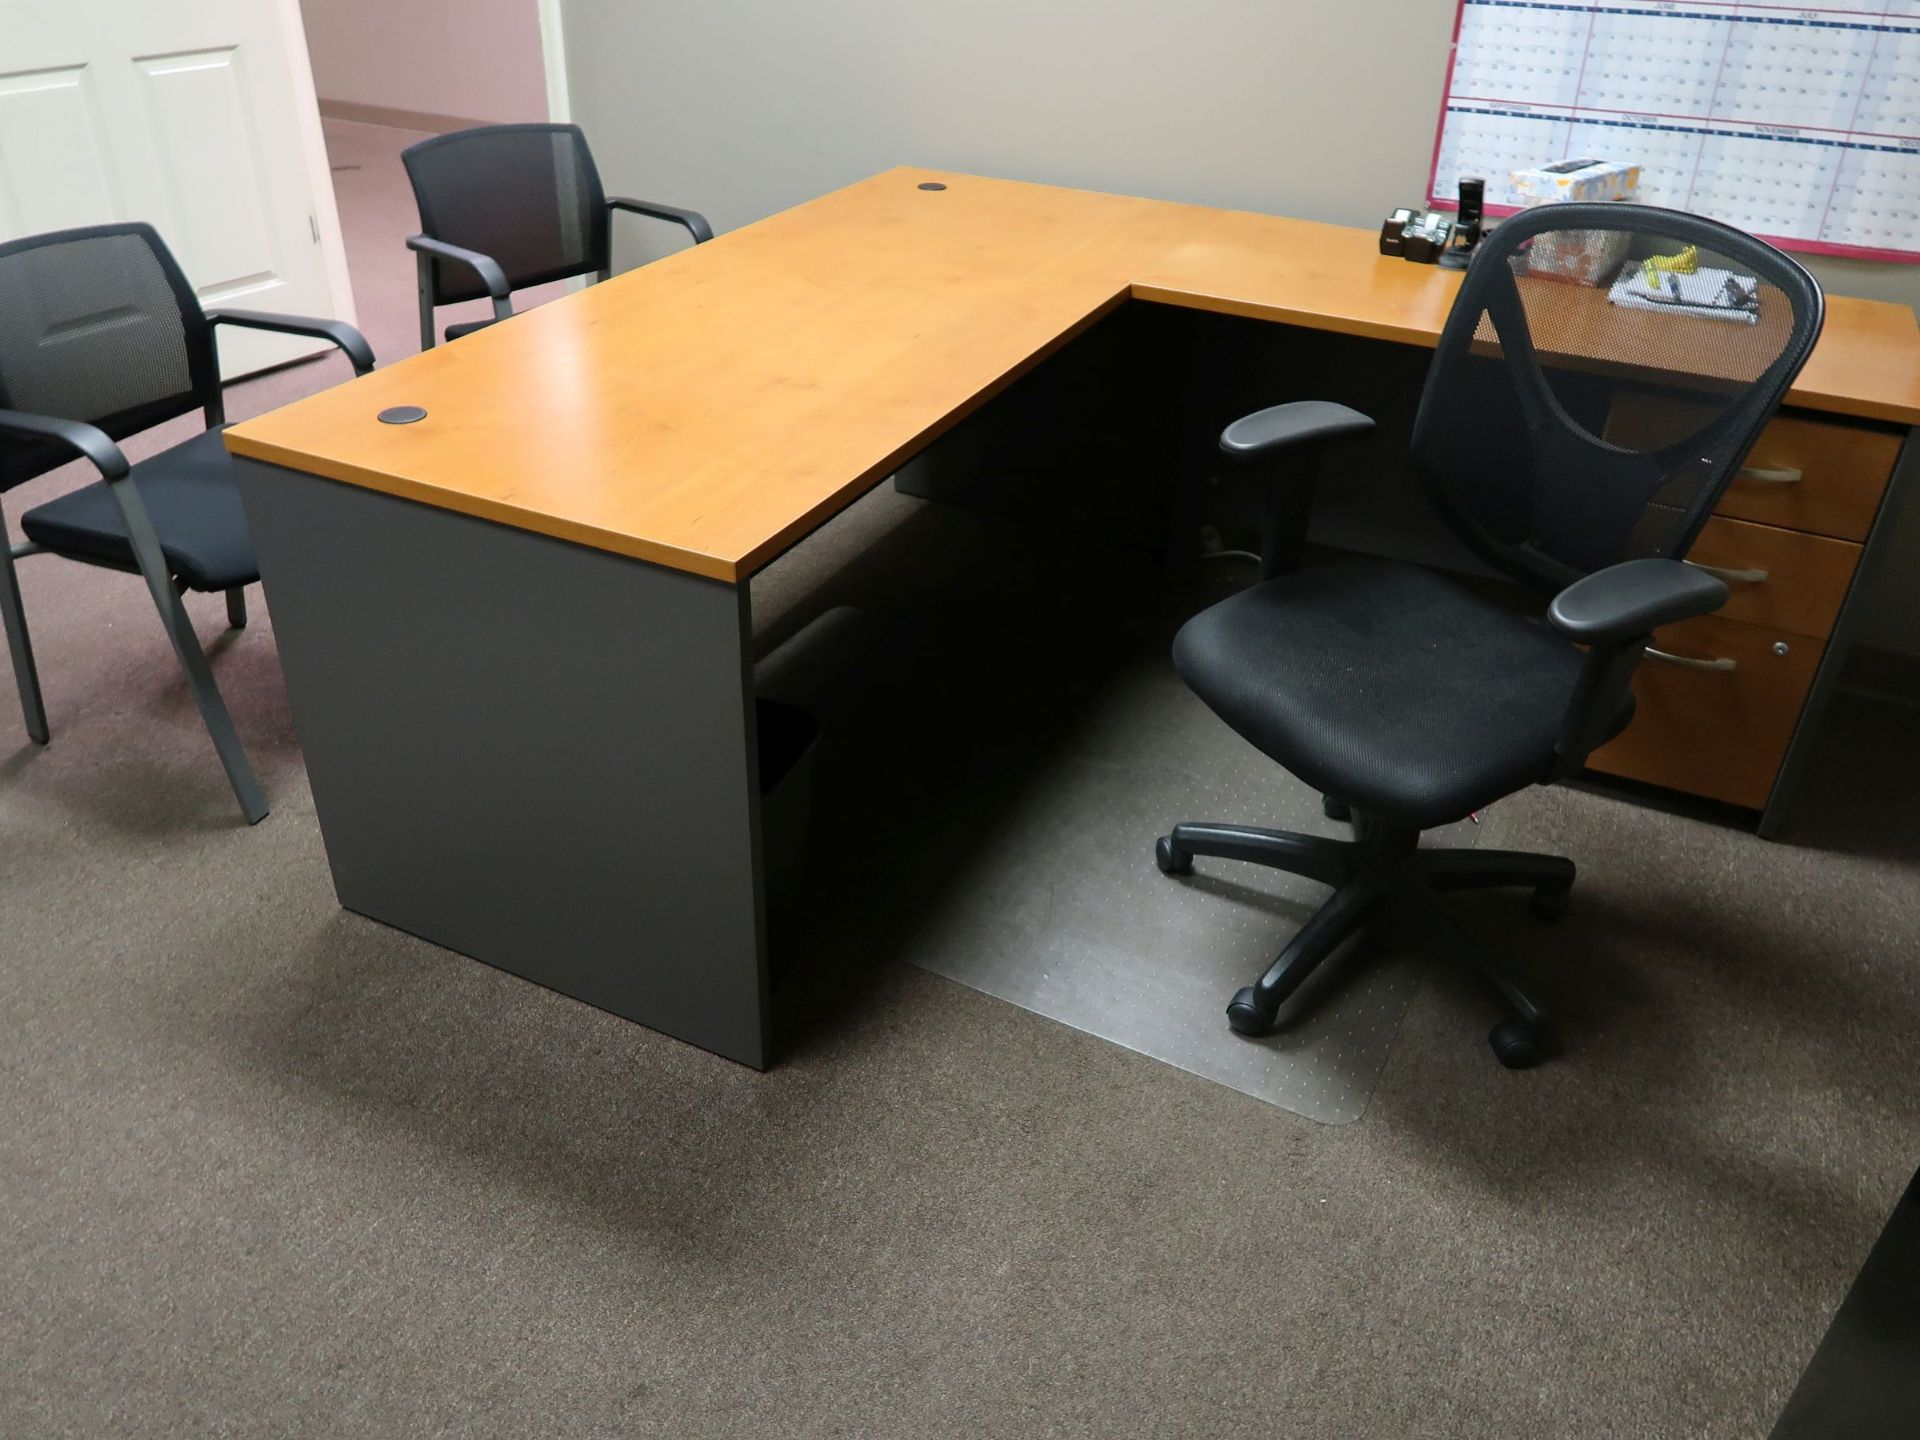 (LOT) CONTENTS OF OFFICE - MISCELLANEOUS FURNITURE